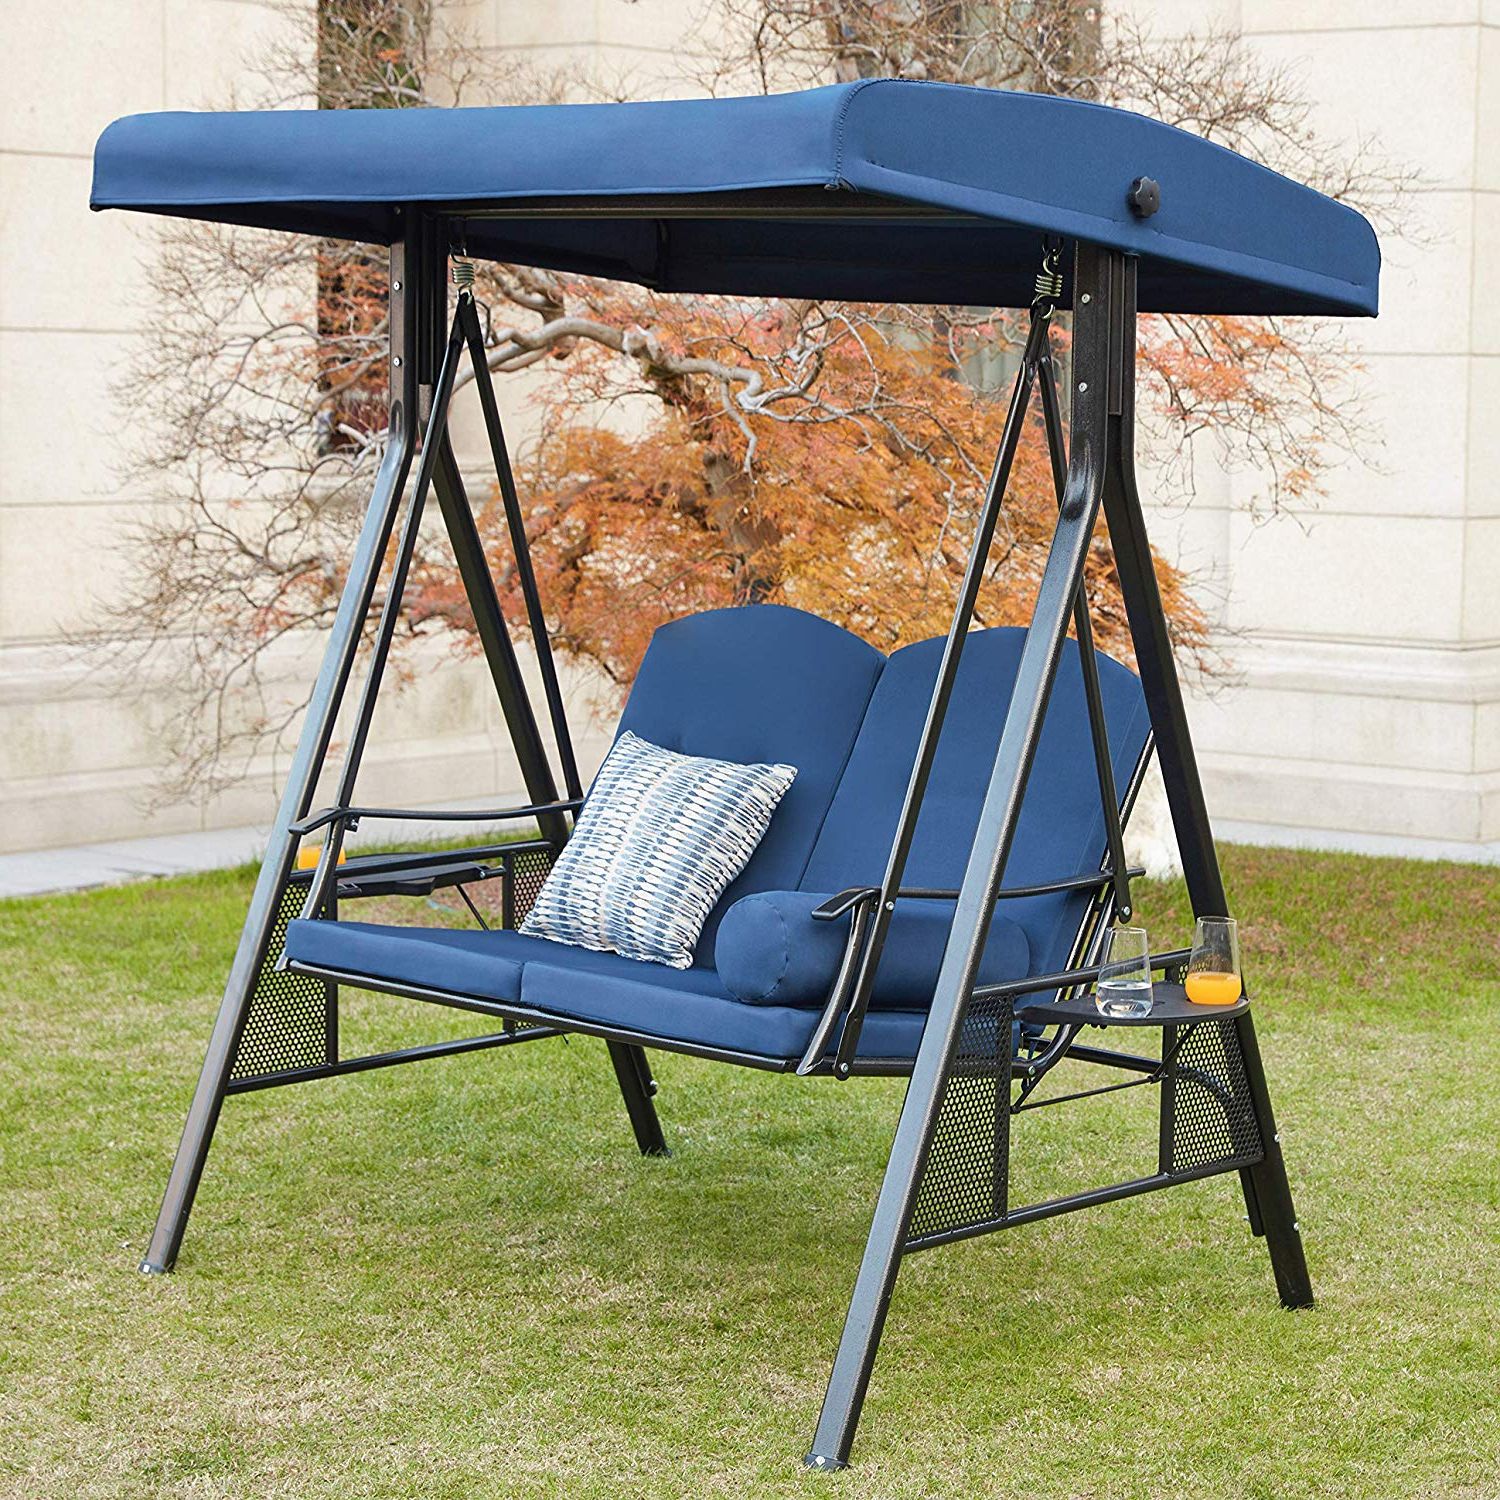 Lokatse Home 2 Person Canopy Outdoor Swing Chair Patio Hammock Cushions And  Teapoys Loveseat Bench Bed Furniture, 2 Seat Blue Pertaining To Recent Patio Loveseat Canopy Hammock Porch Swings With Stand (Photo 24 of 30)